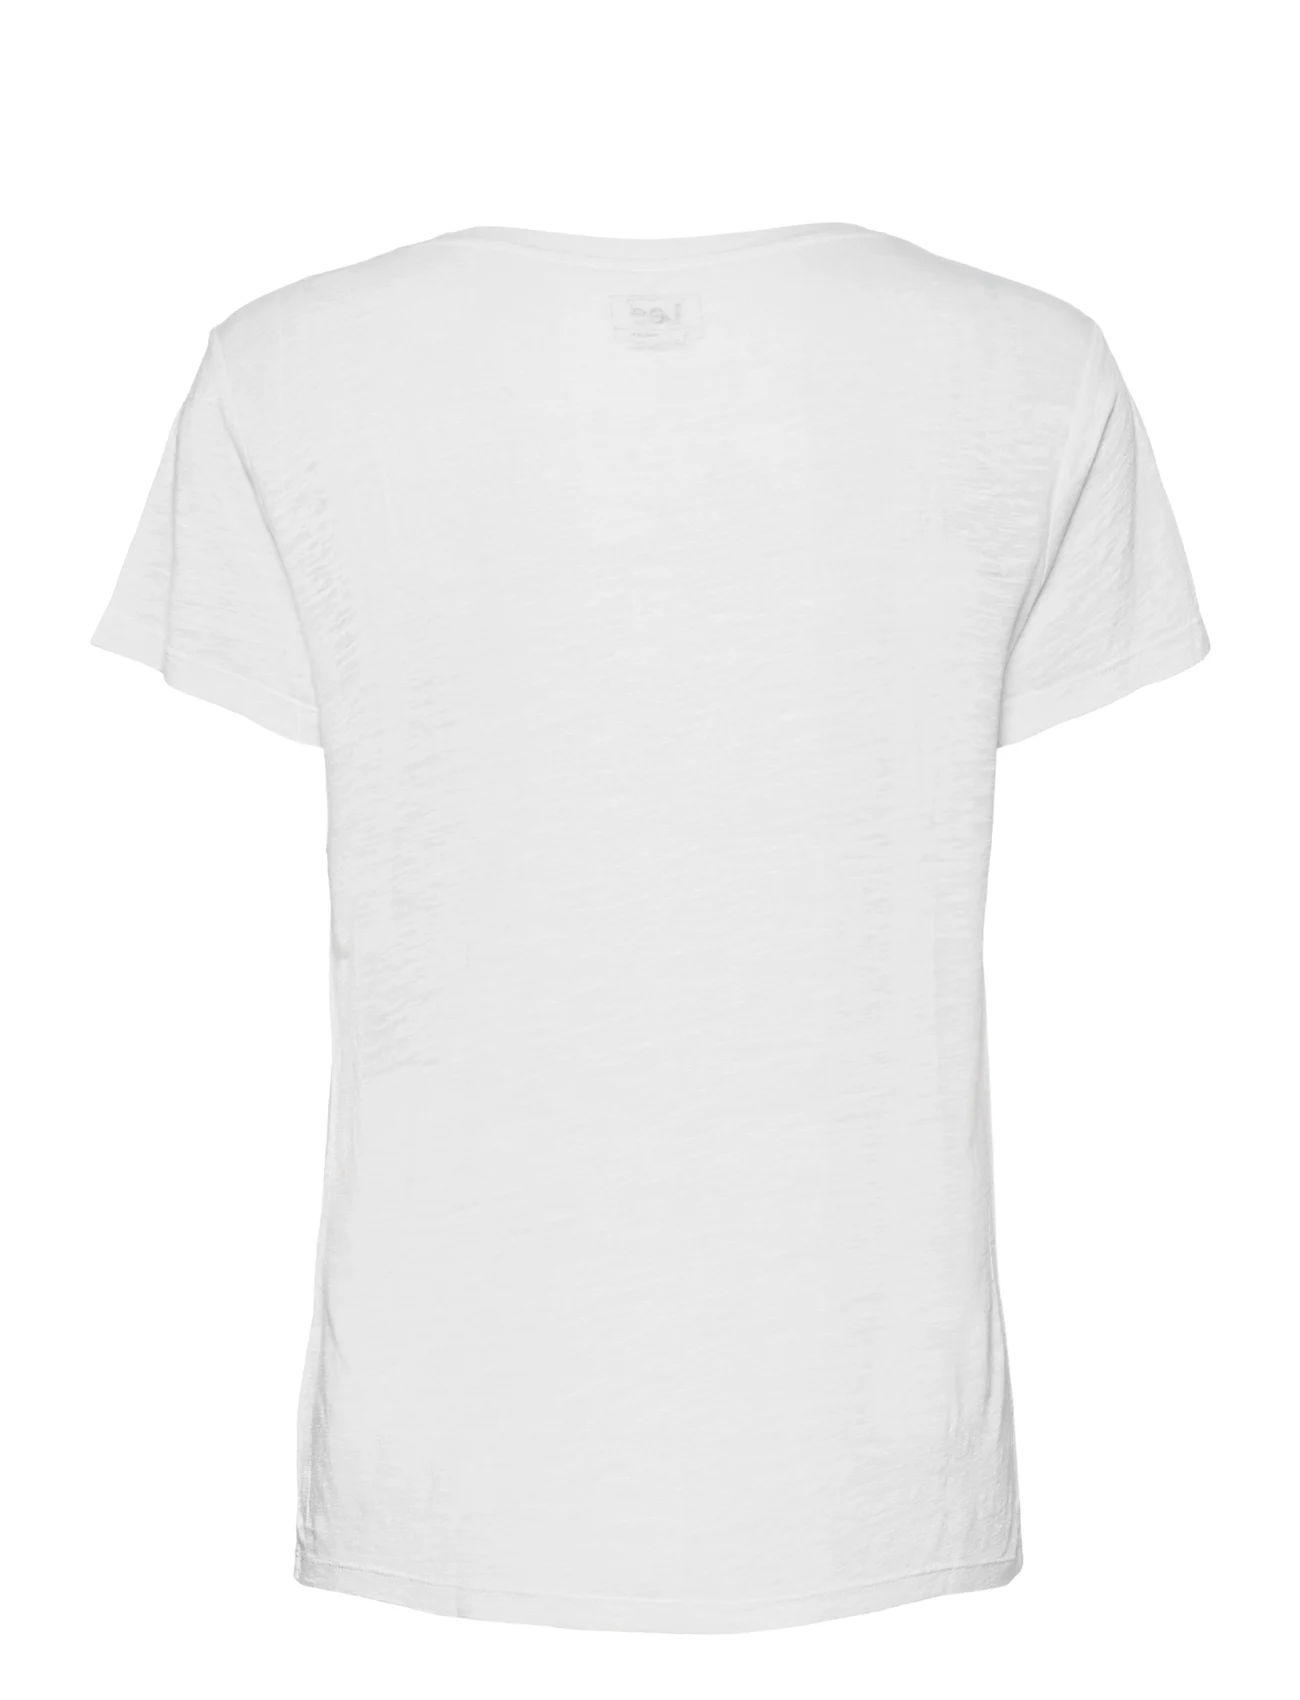 Lee Jeans - V NECK TEE - t-shirt & tops - bright white - 1